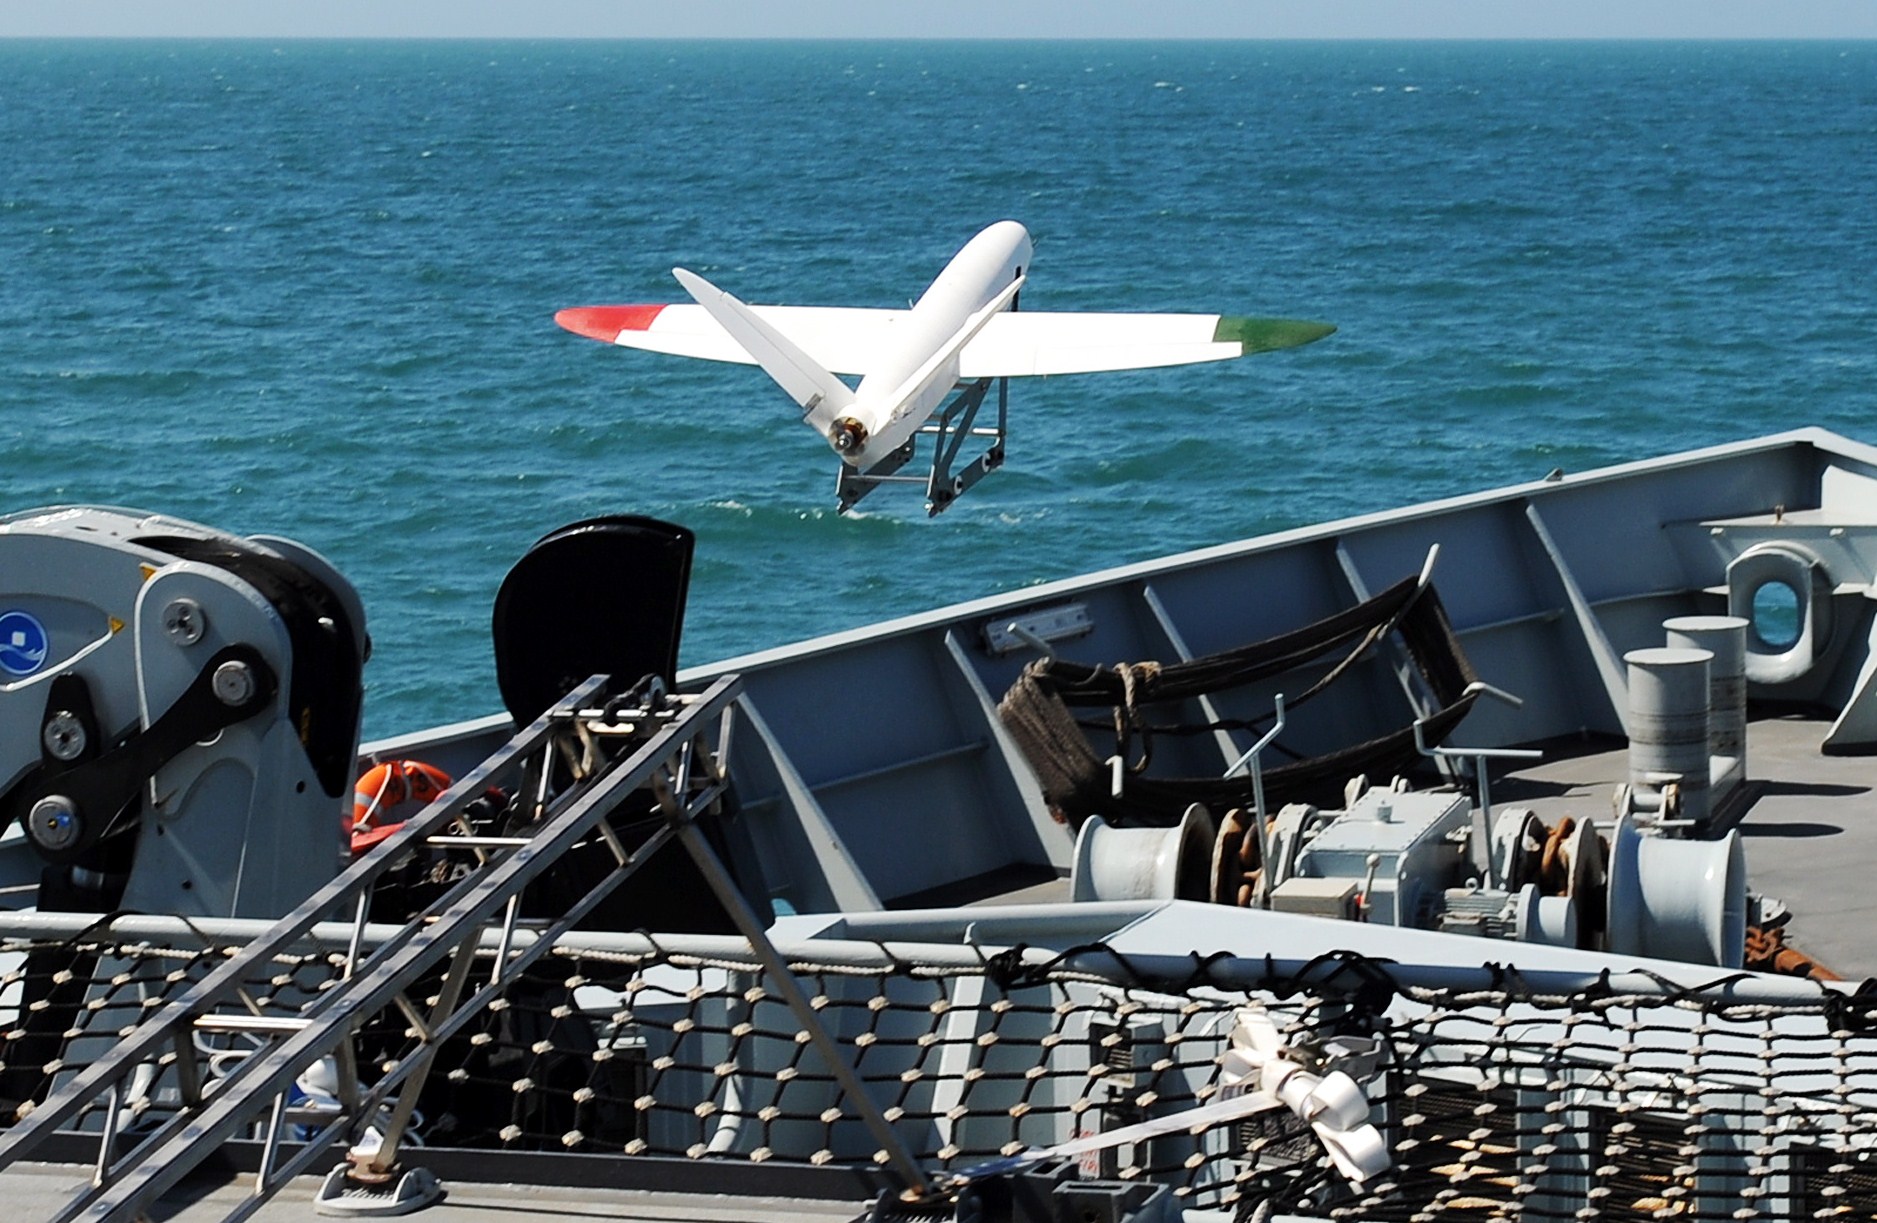 A 3D printed aircraft has successfully launched off the front of a Royal Navy warship and landed safely on a Dorset beach off HMS Mersey. UK Royal Navy Photo